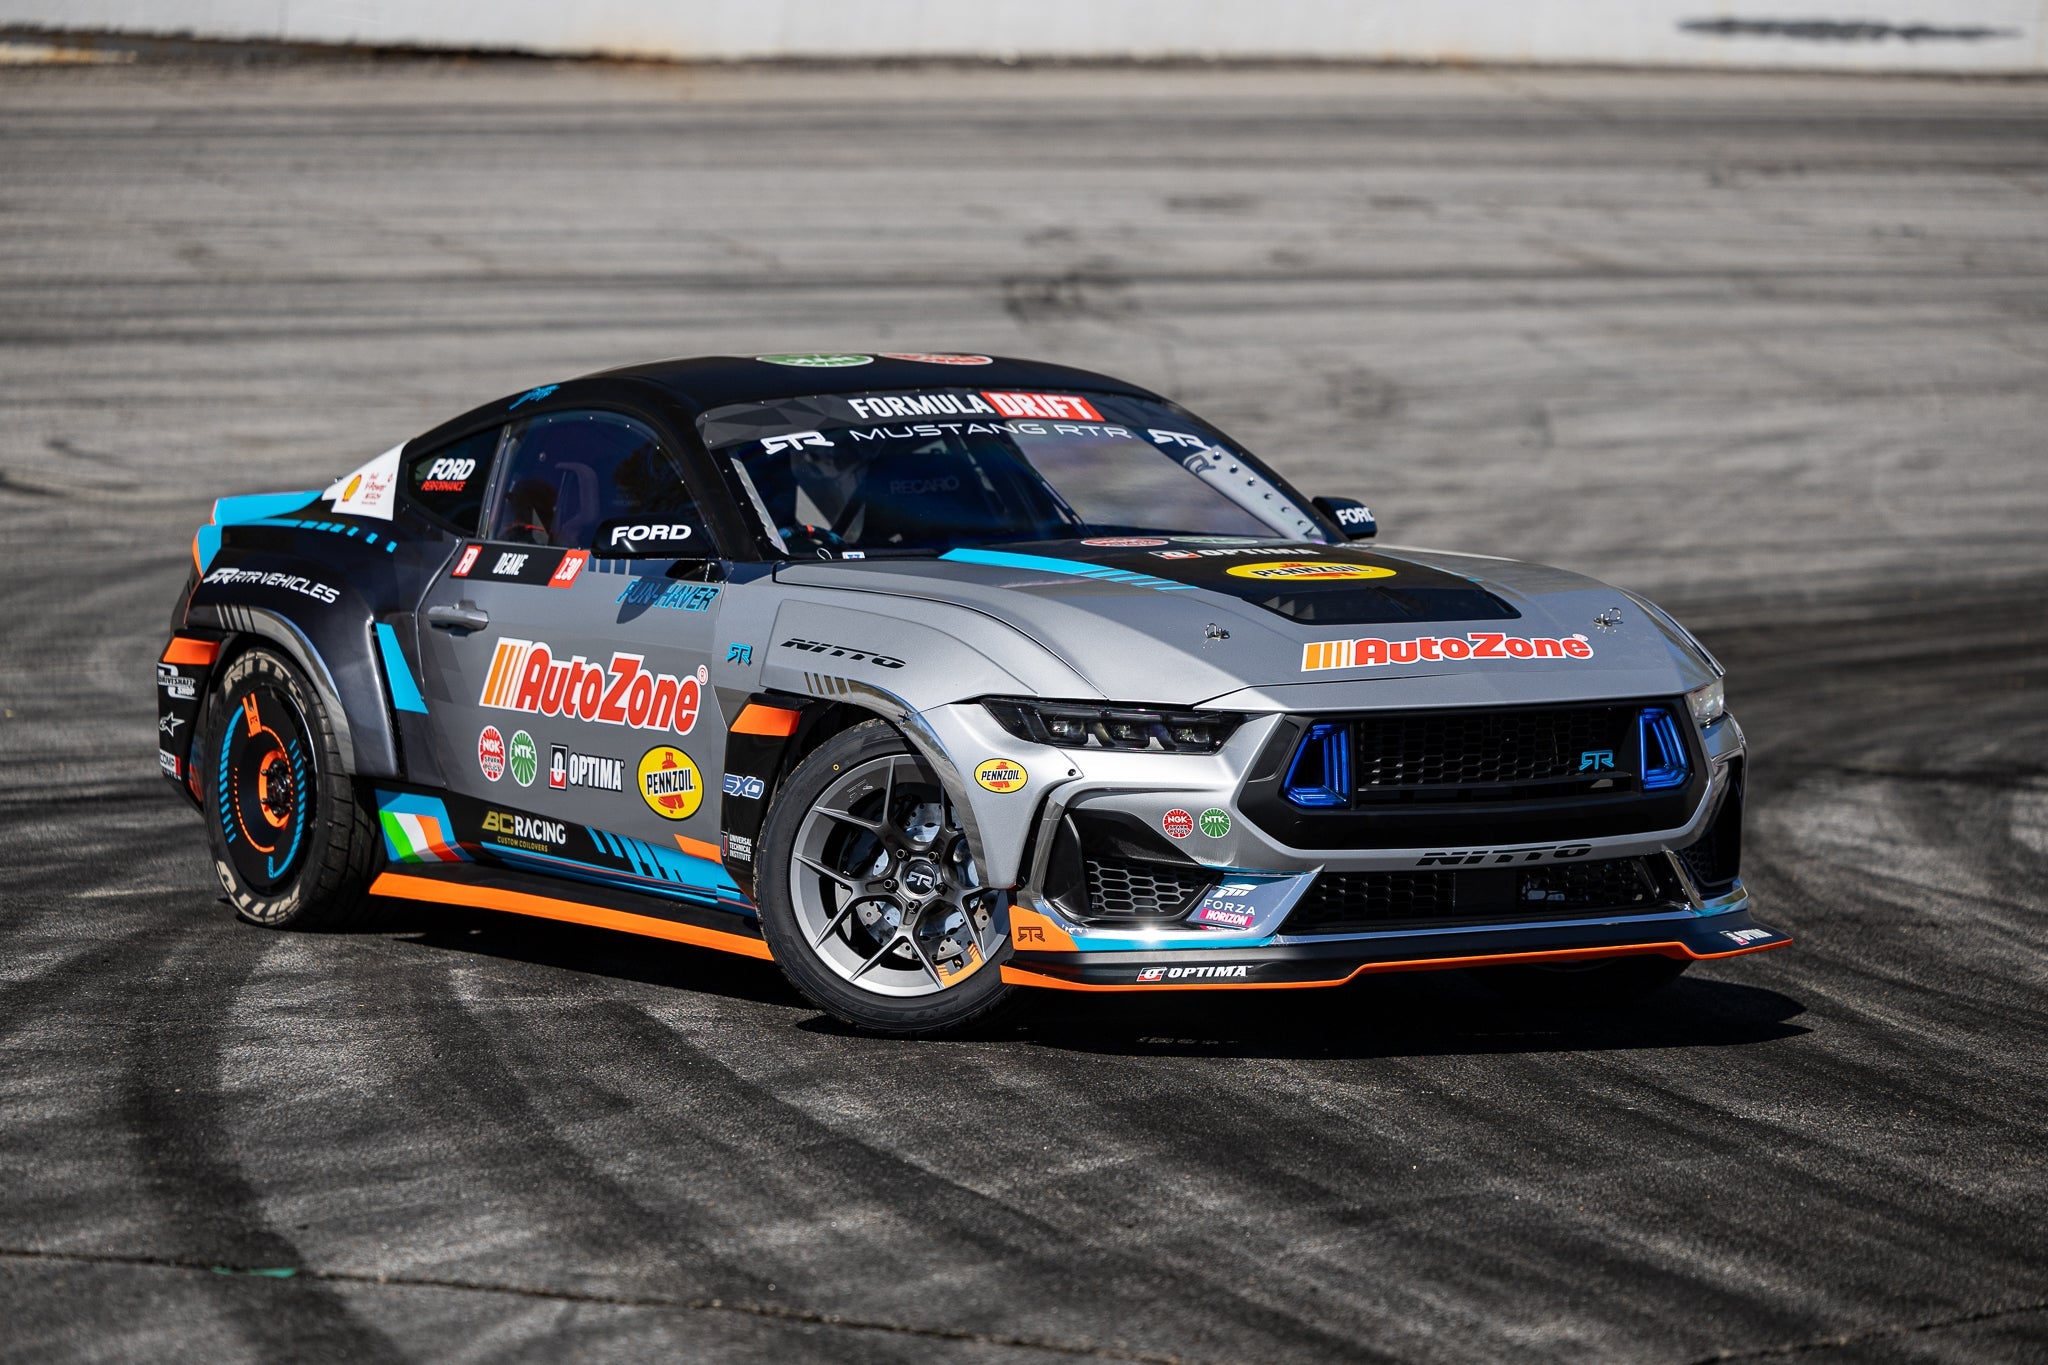 James Deane's 2024 Mustang RTR Spec 5 on a track, showcasing a close-up of partner logos. Motorsport and performance car elements visible.